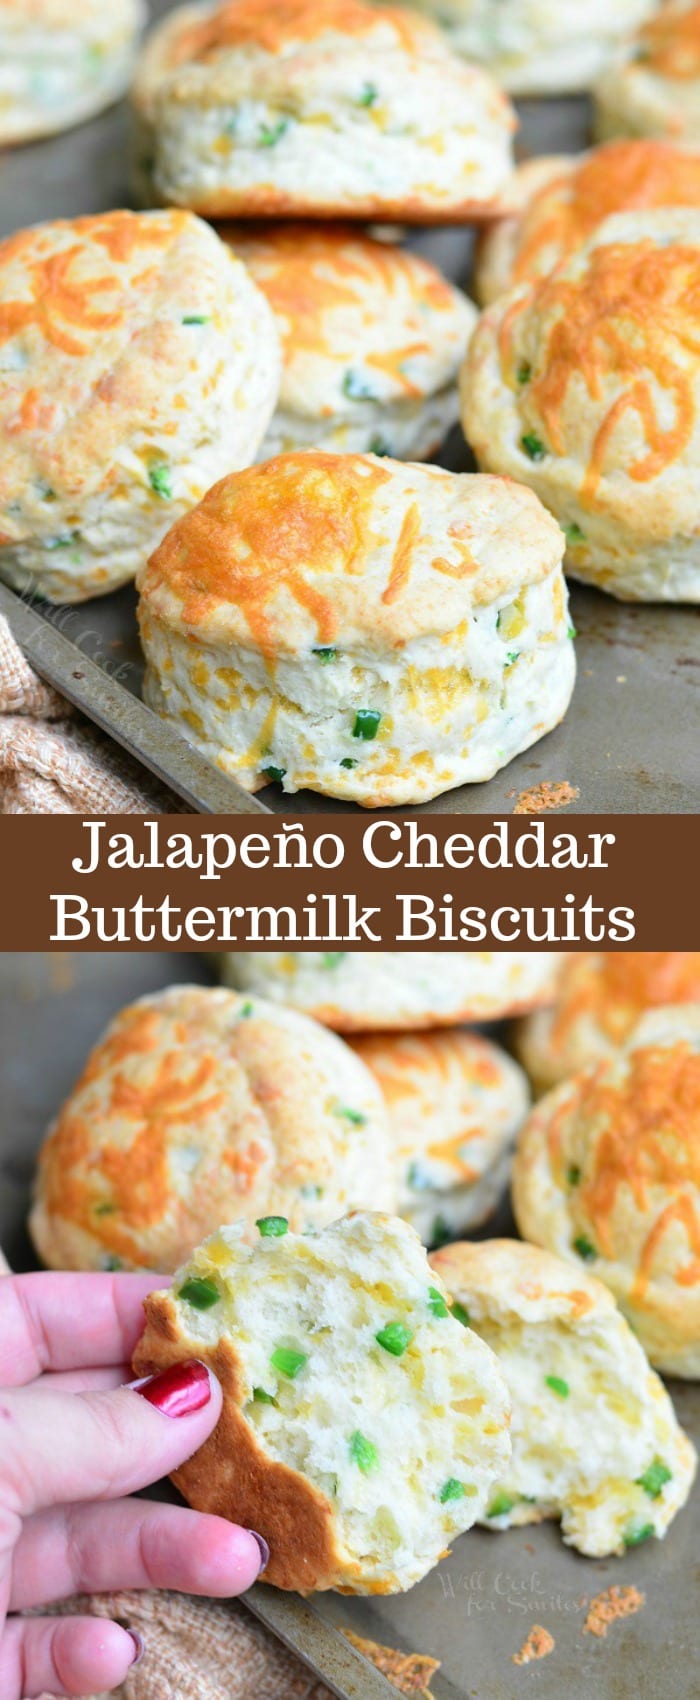 These Jalapeno Cheddar Buttermilk Biscuits are soft and fluffy with a great cheesy flavor and a zesty bite from jalapeno peppers. #bread #biscuits #jalapeno #cheesy #sidedish